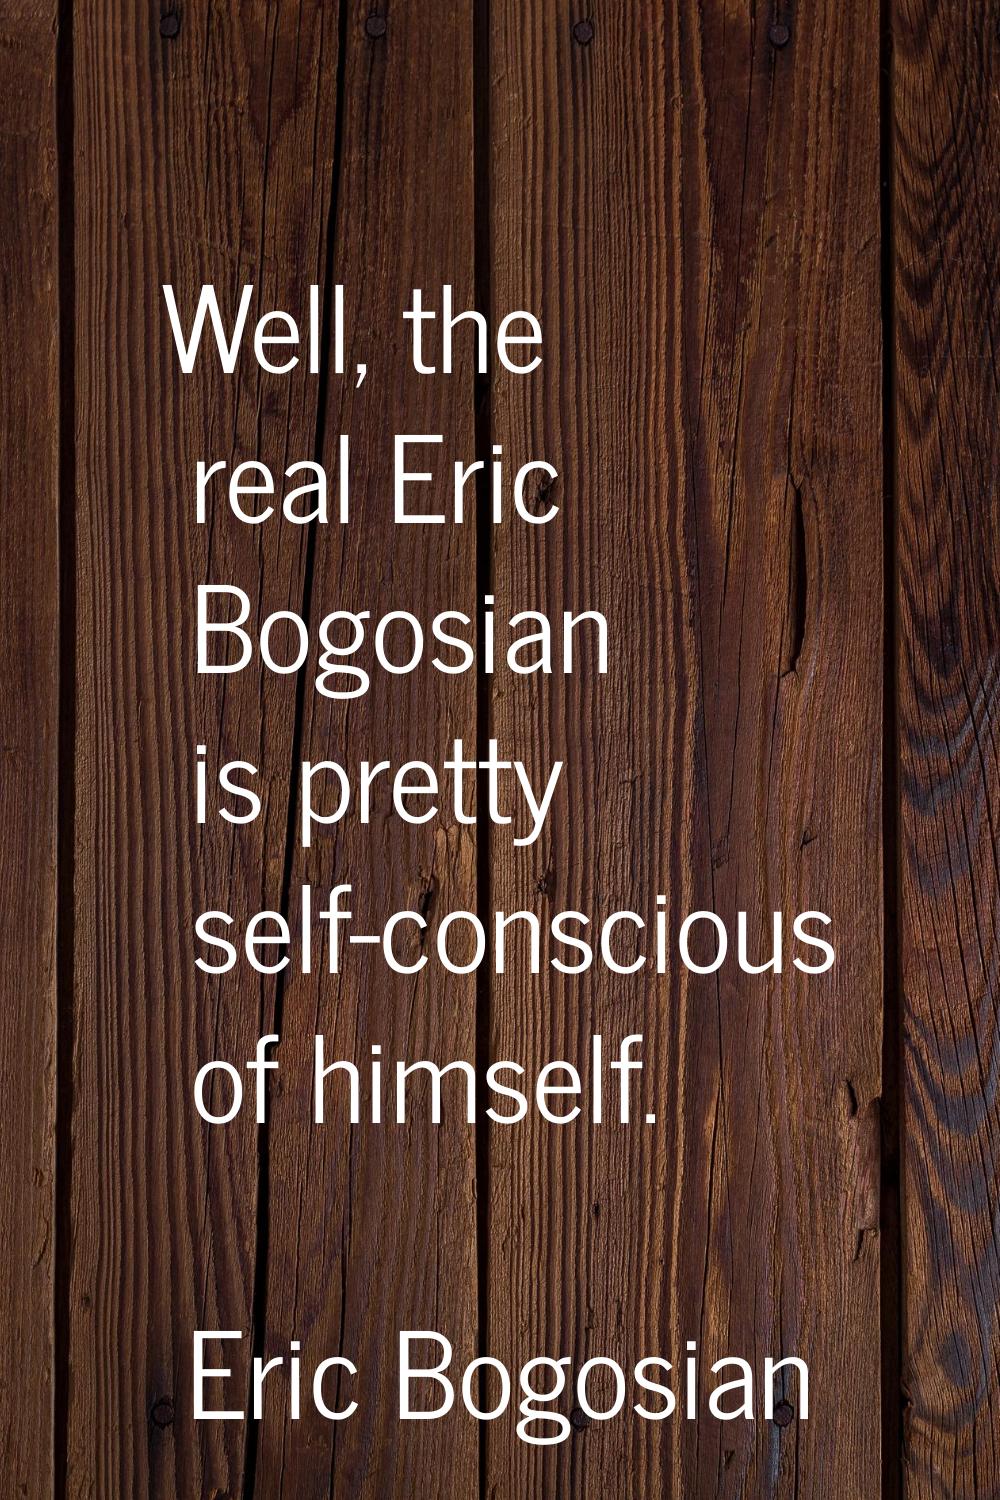 Well, the real Eric Bogosian is pretty self-conscious of himself.